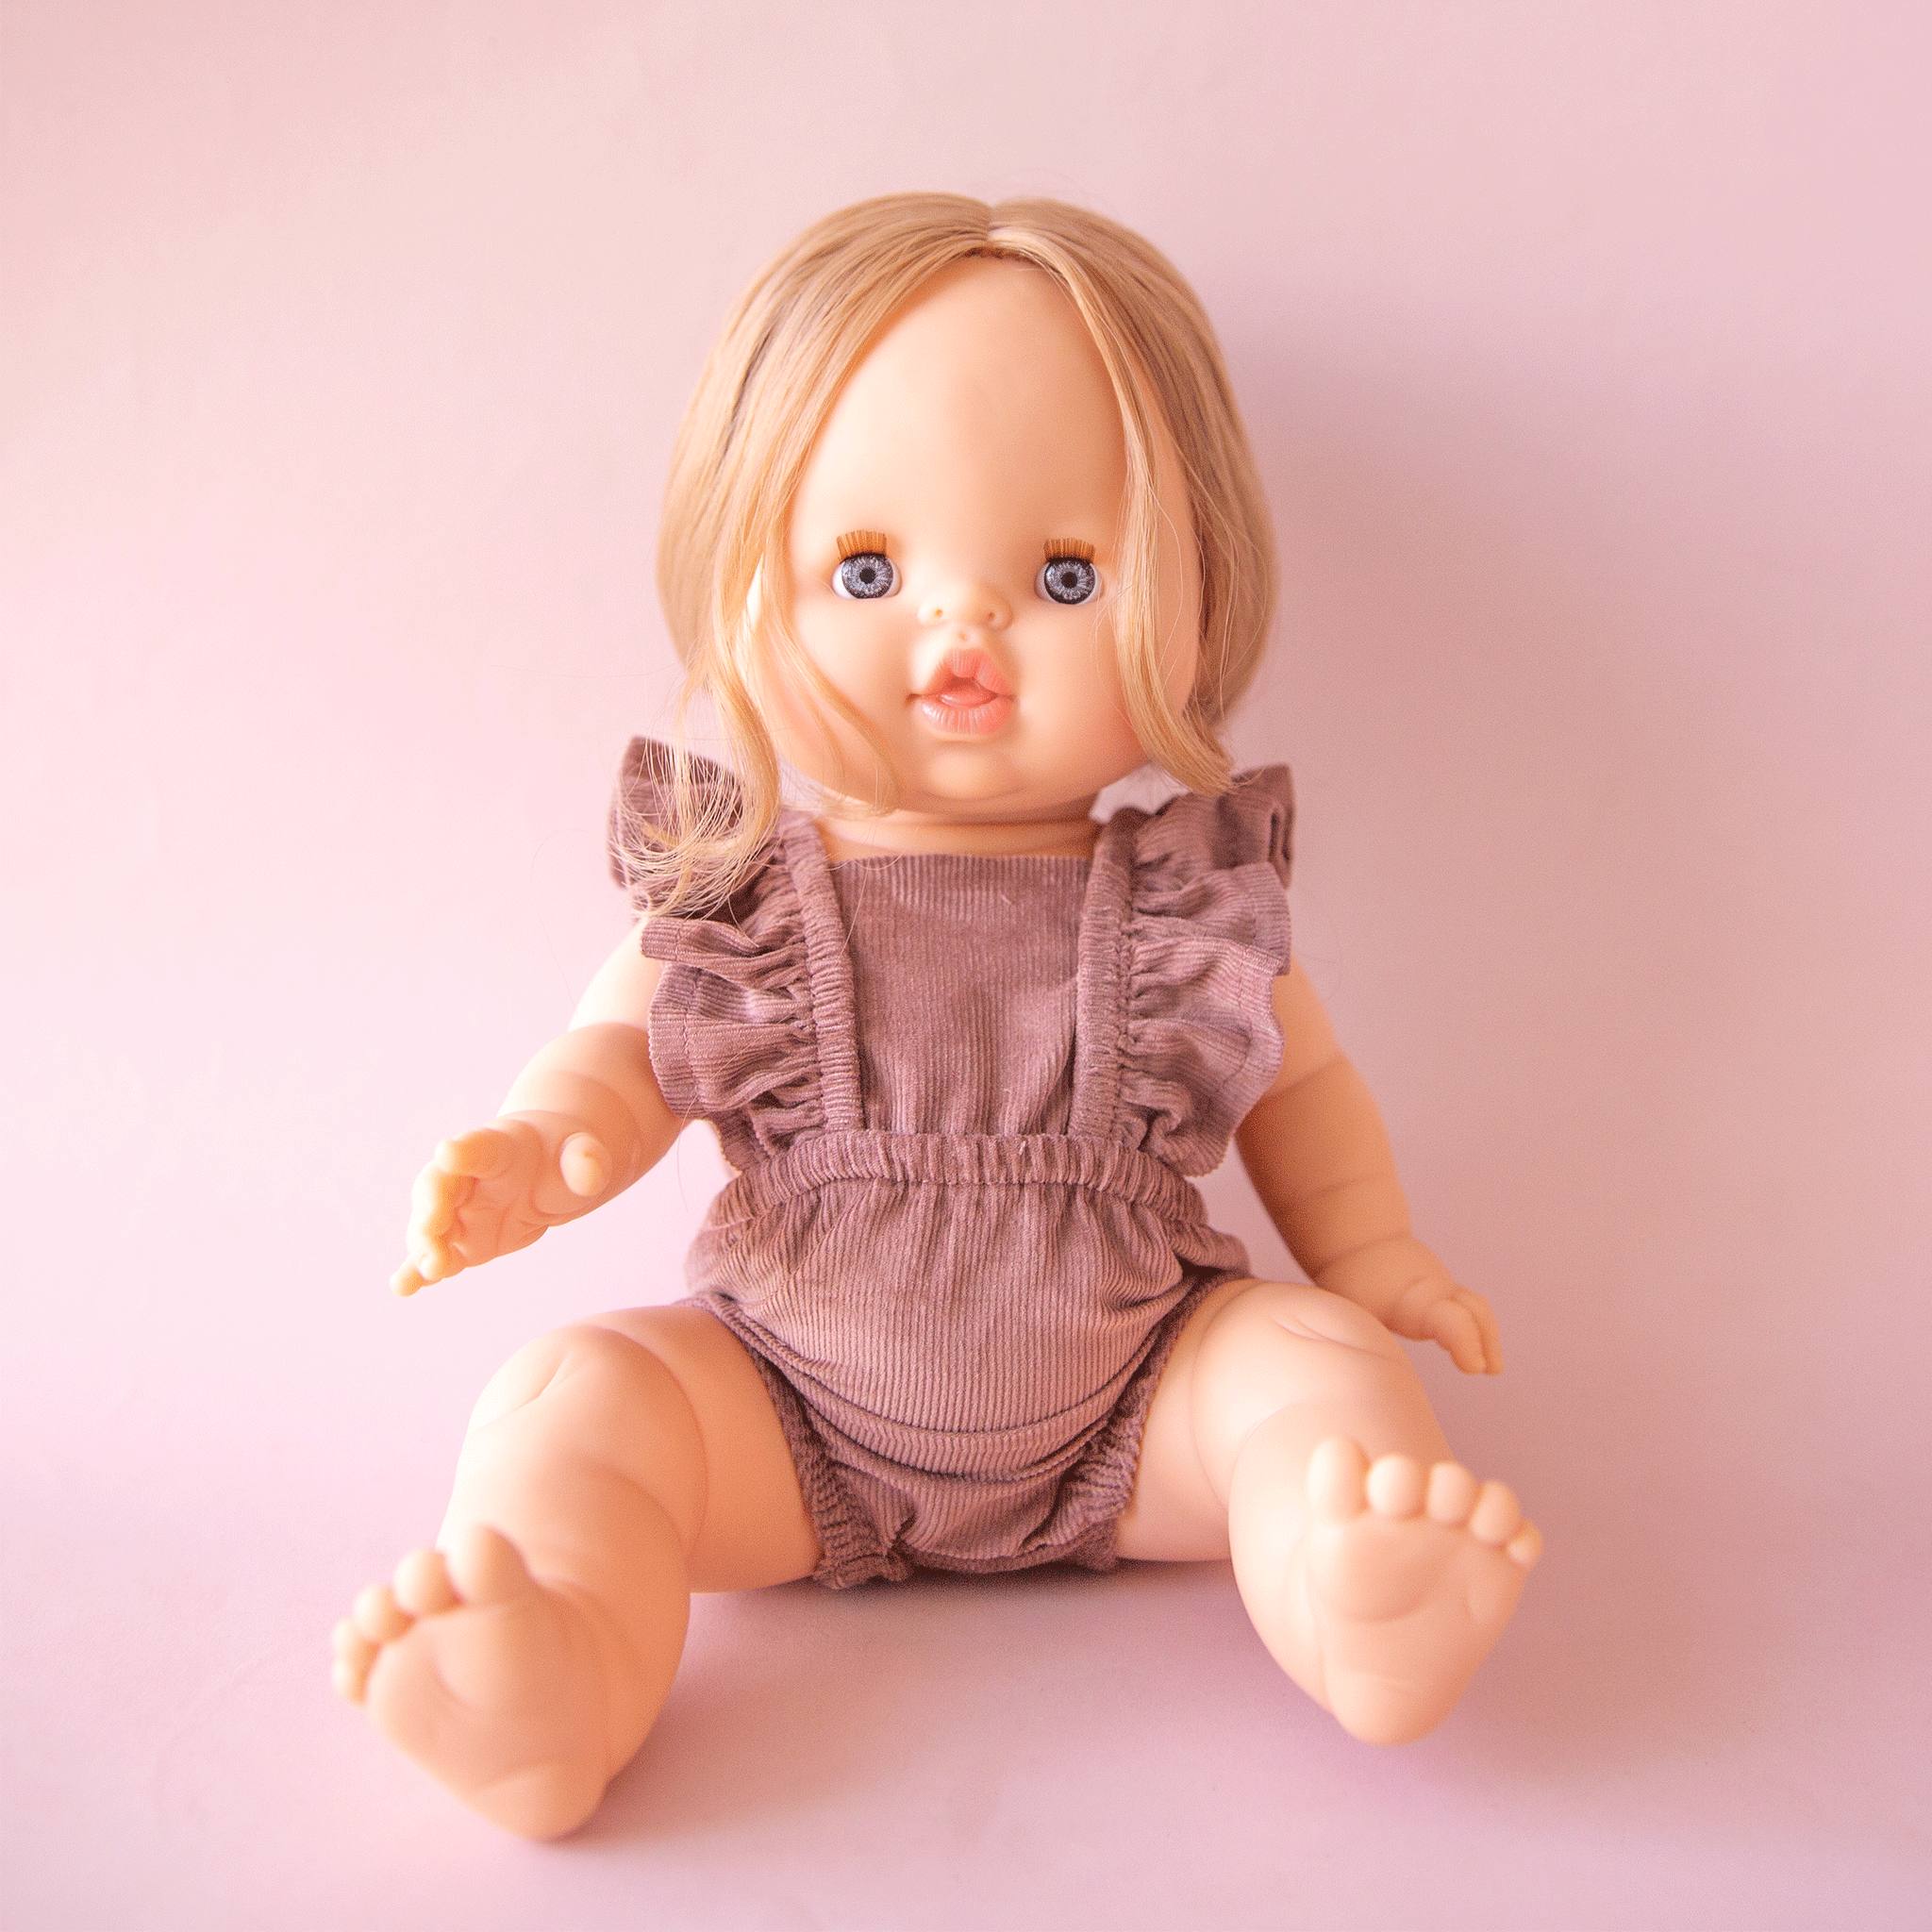 On a pink background is a baby doll with blonde braided hair and blue eyes wearing a pink romper not included with purchase. 